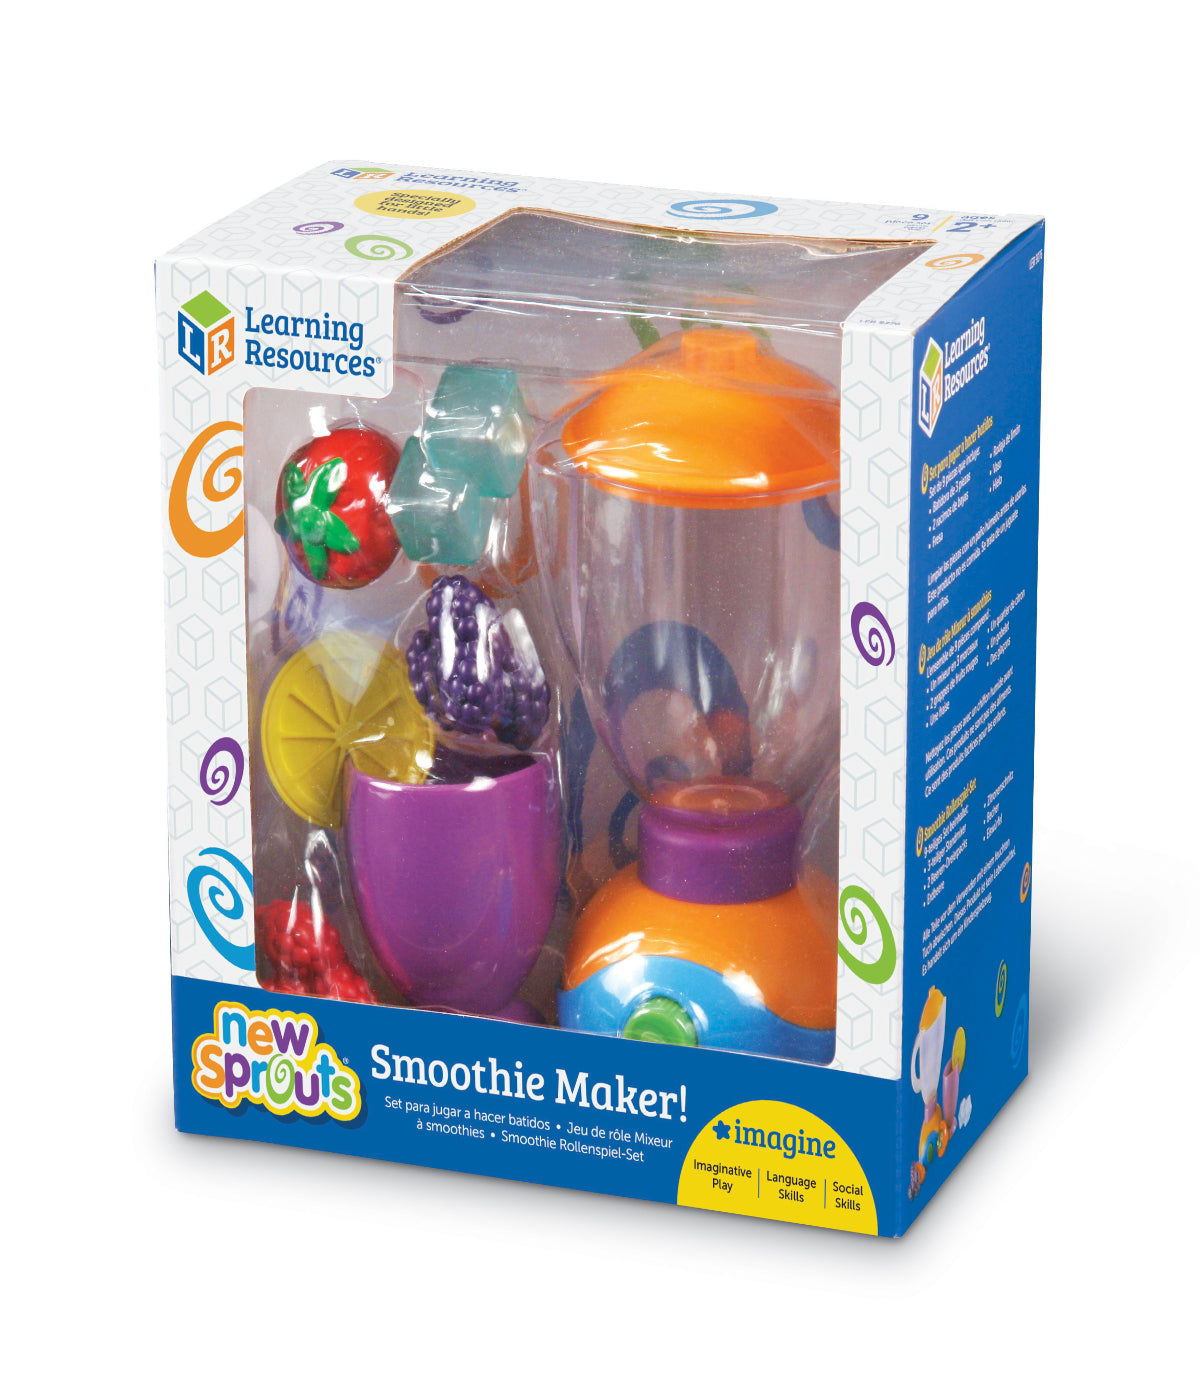 New Sprouts - Smoothie Maker! Multi